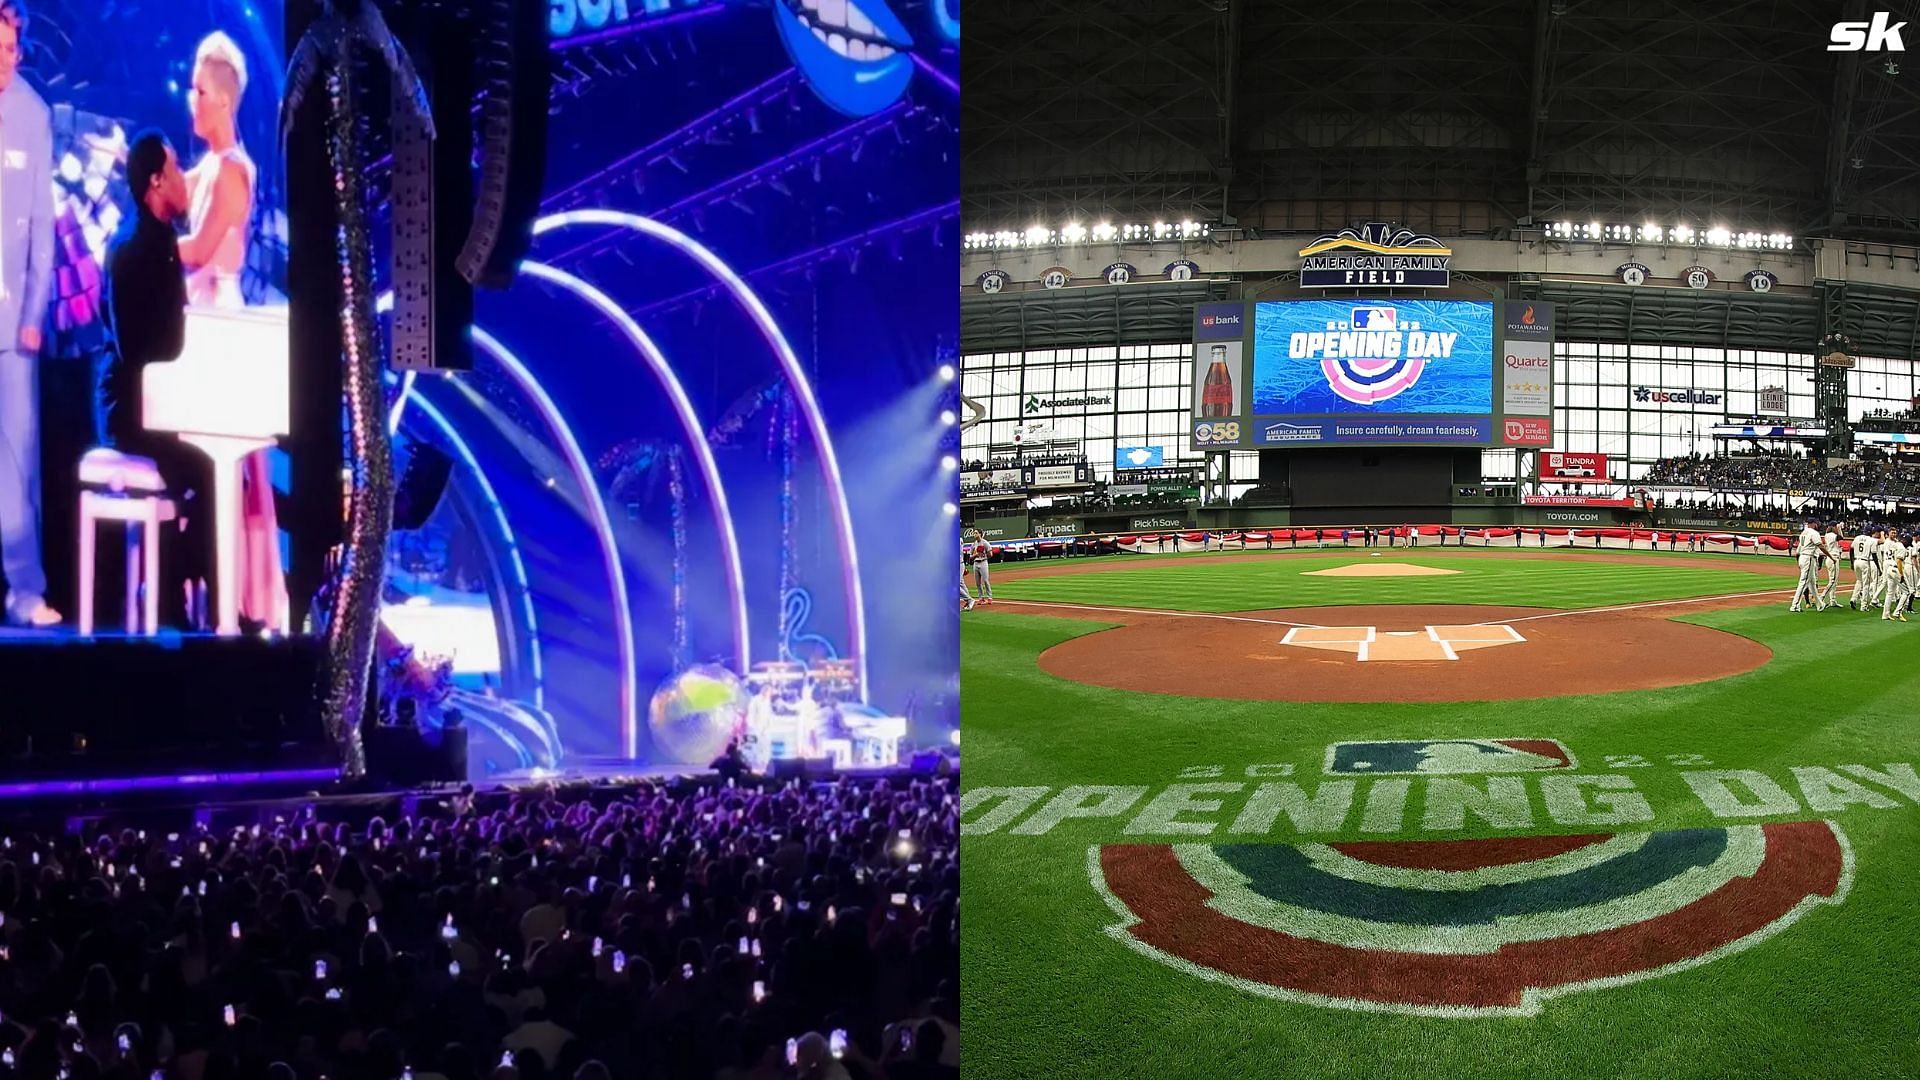 2022 Opening day at American Family Field; pop icon PINK performing in a concert at the Brewers home stadium